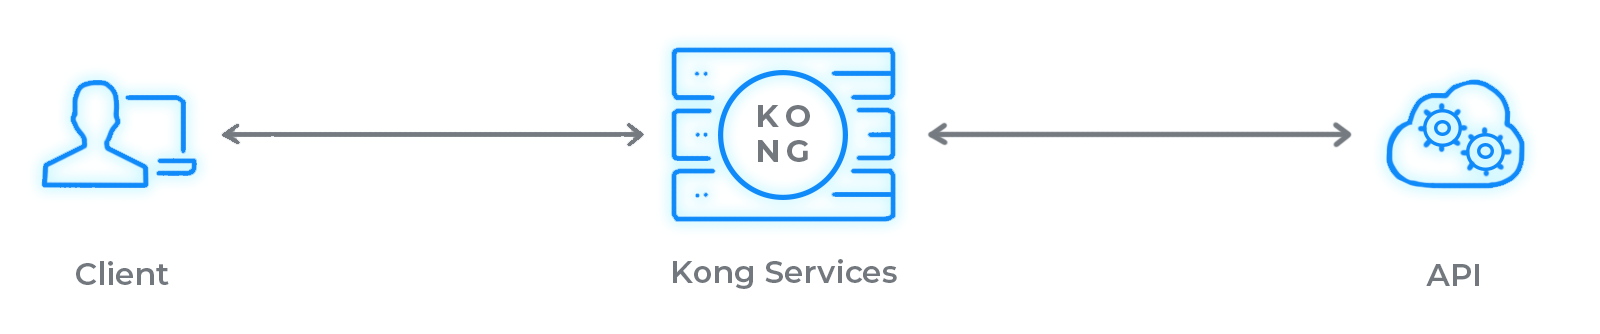 A technical diagram showing the relationship between a client, Kong Services, and a API